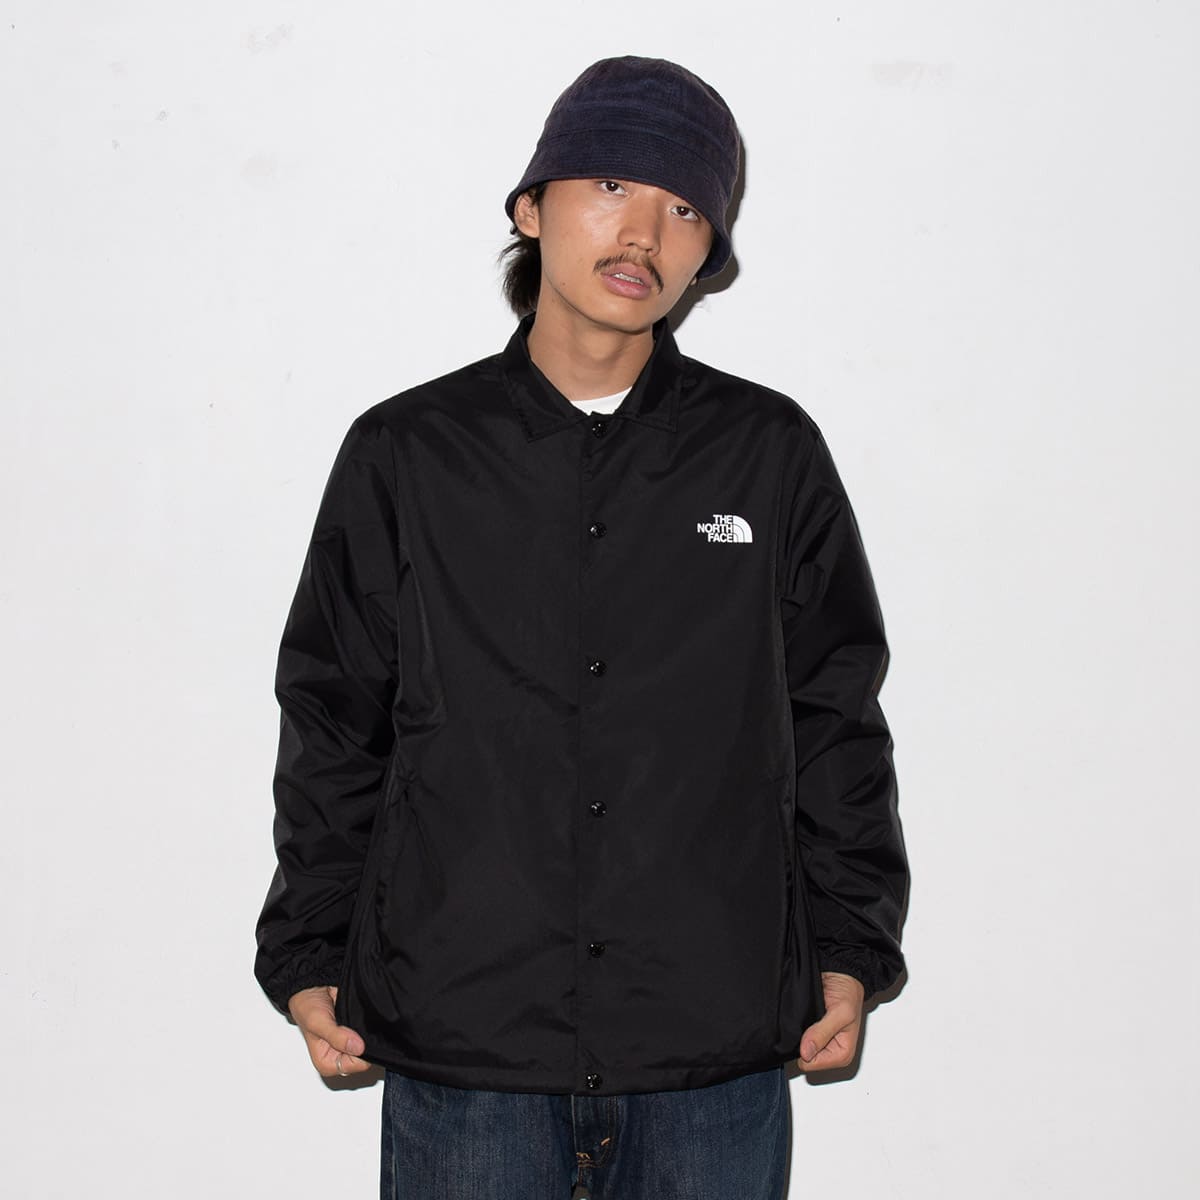 THE NORTH FACE NEVER STOP ING THE COACH JACKET BLACK 24SS-I